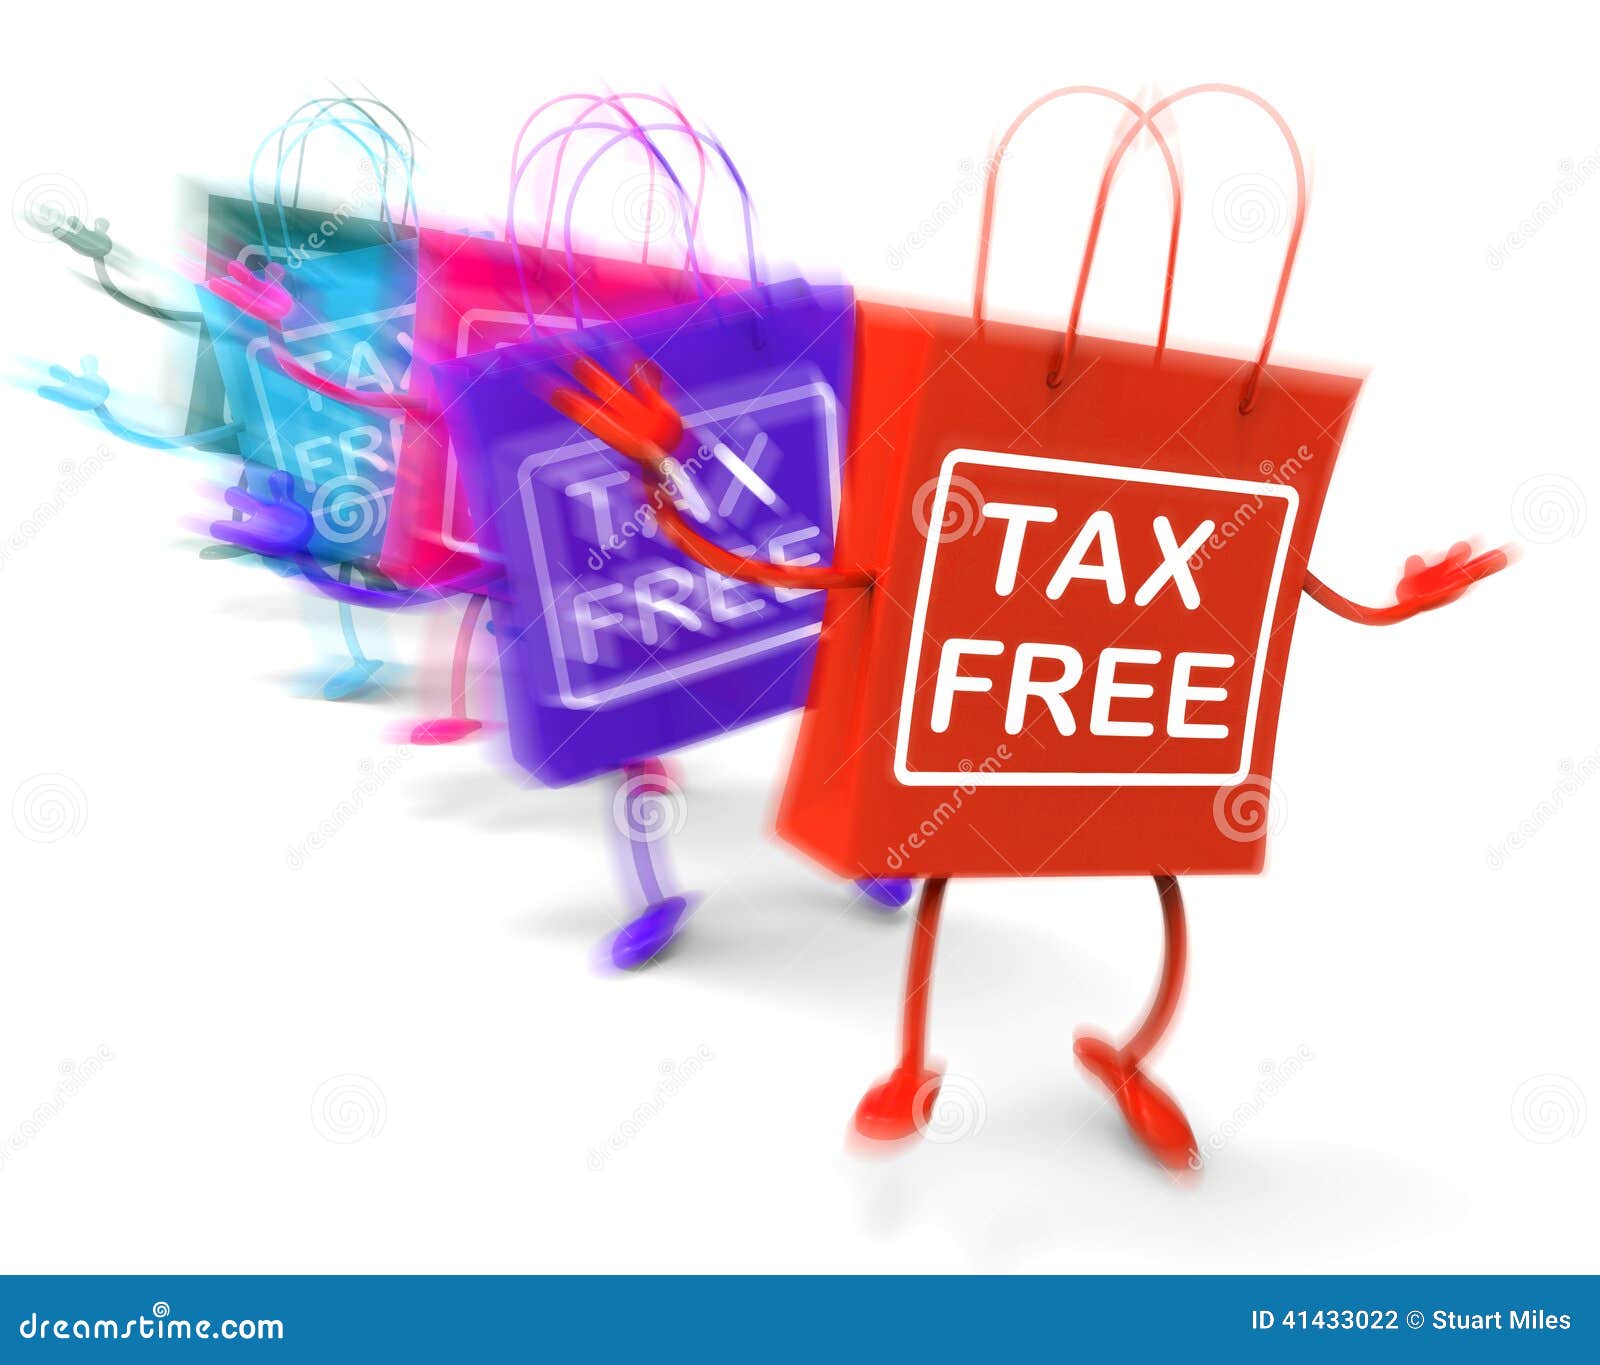 tax free shopping bags represent duty exempt discounts